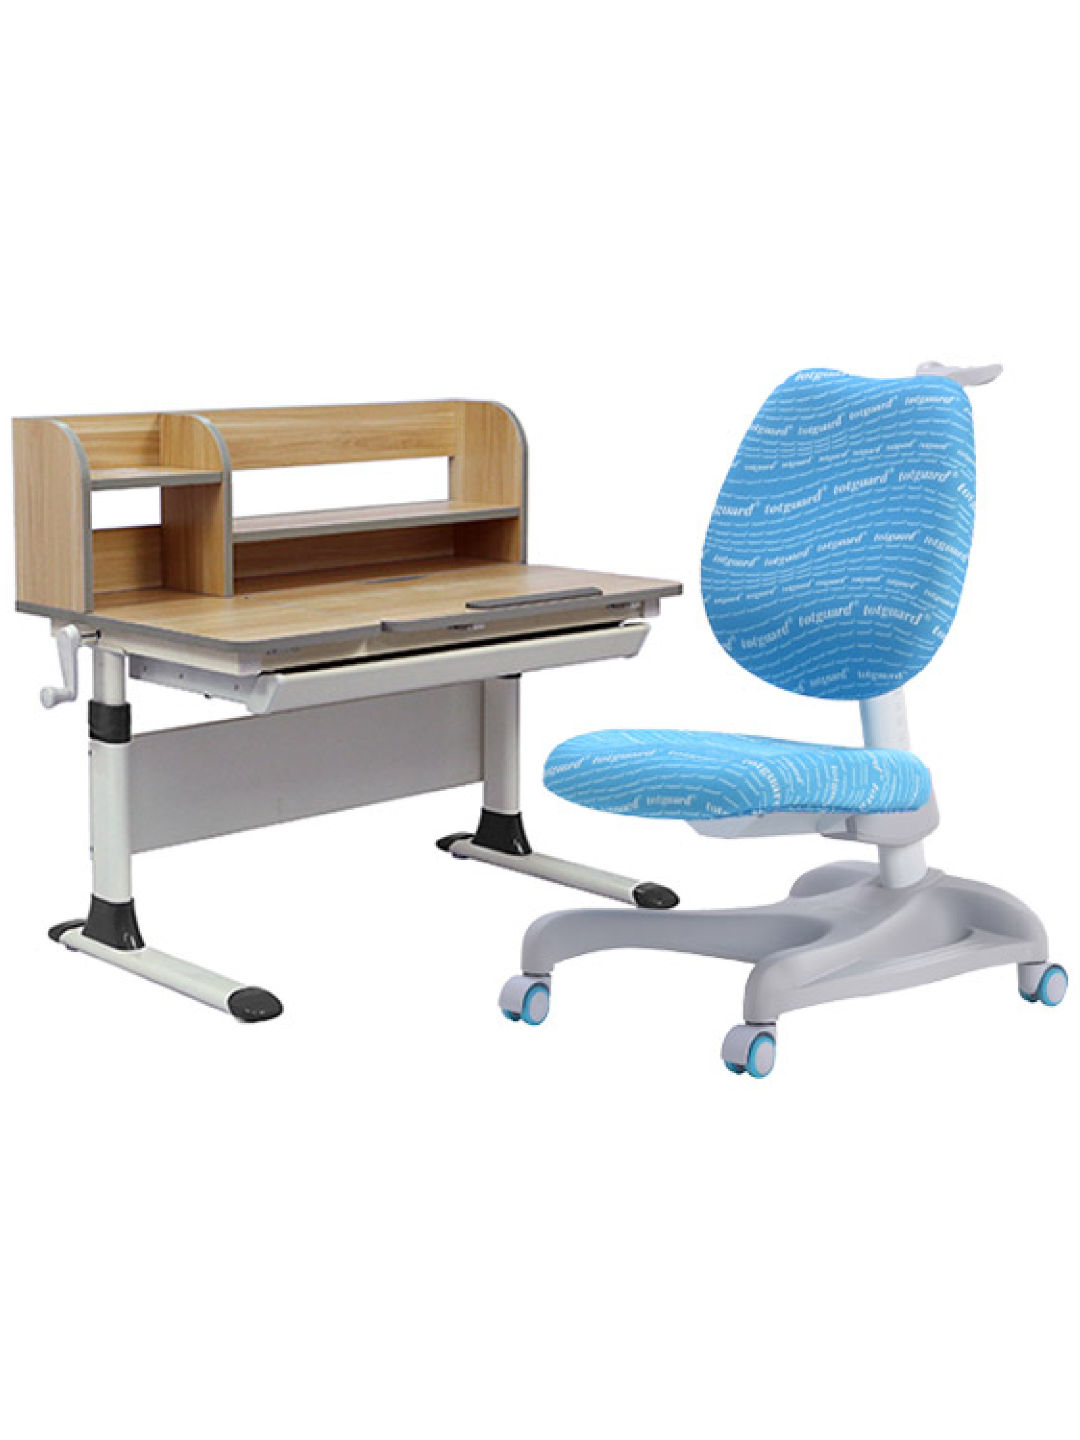 Totguard Dopey Study Table + Eric Chair Bundle